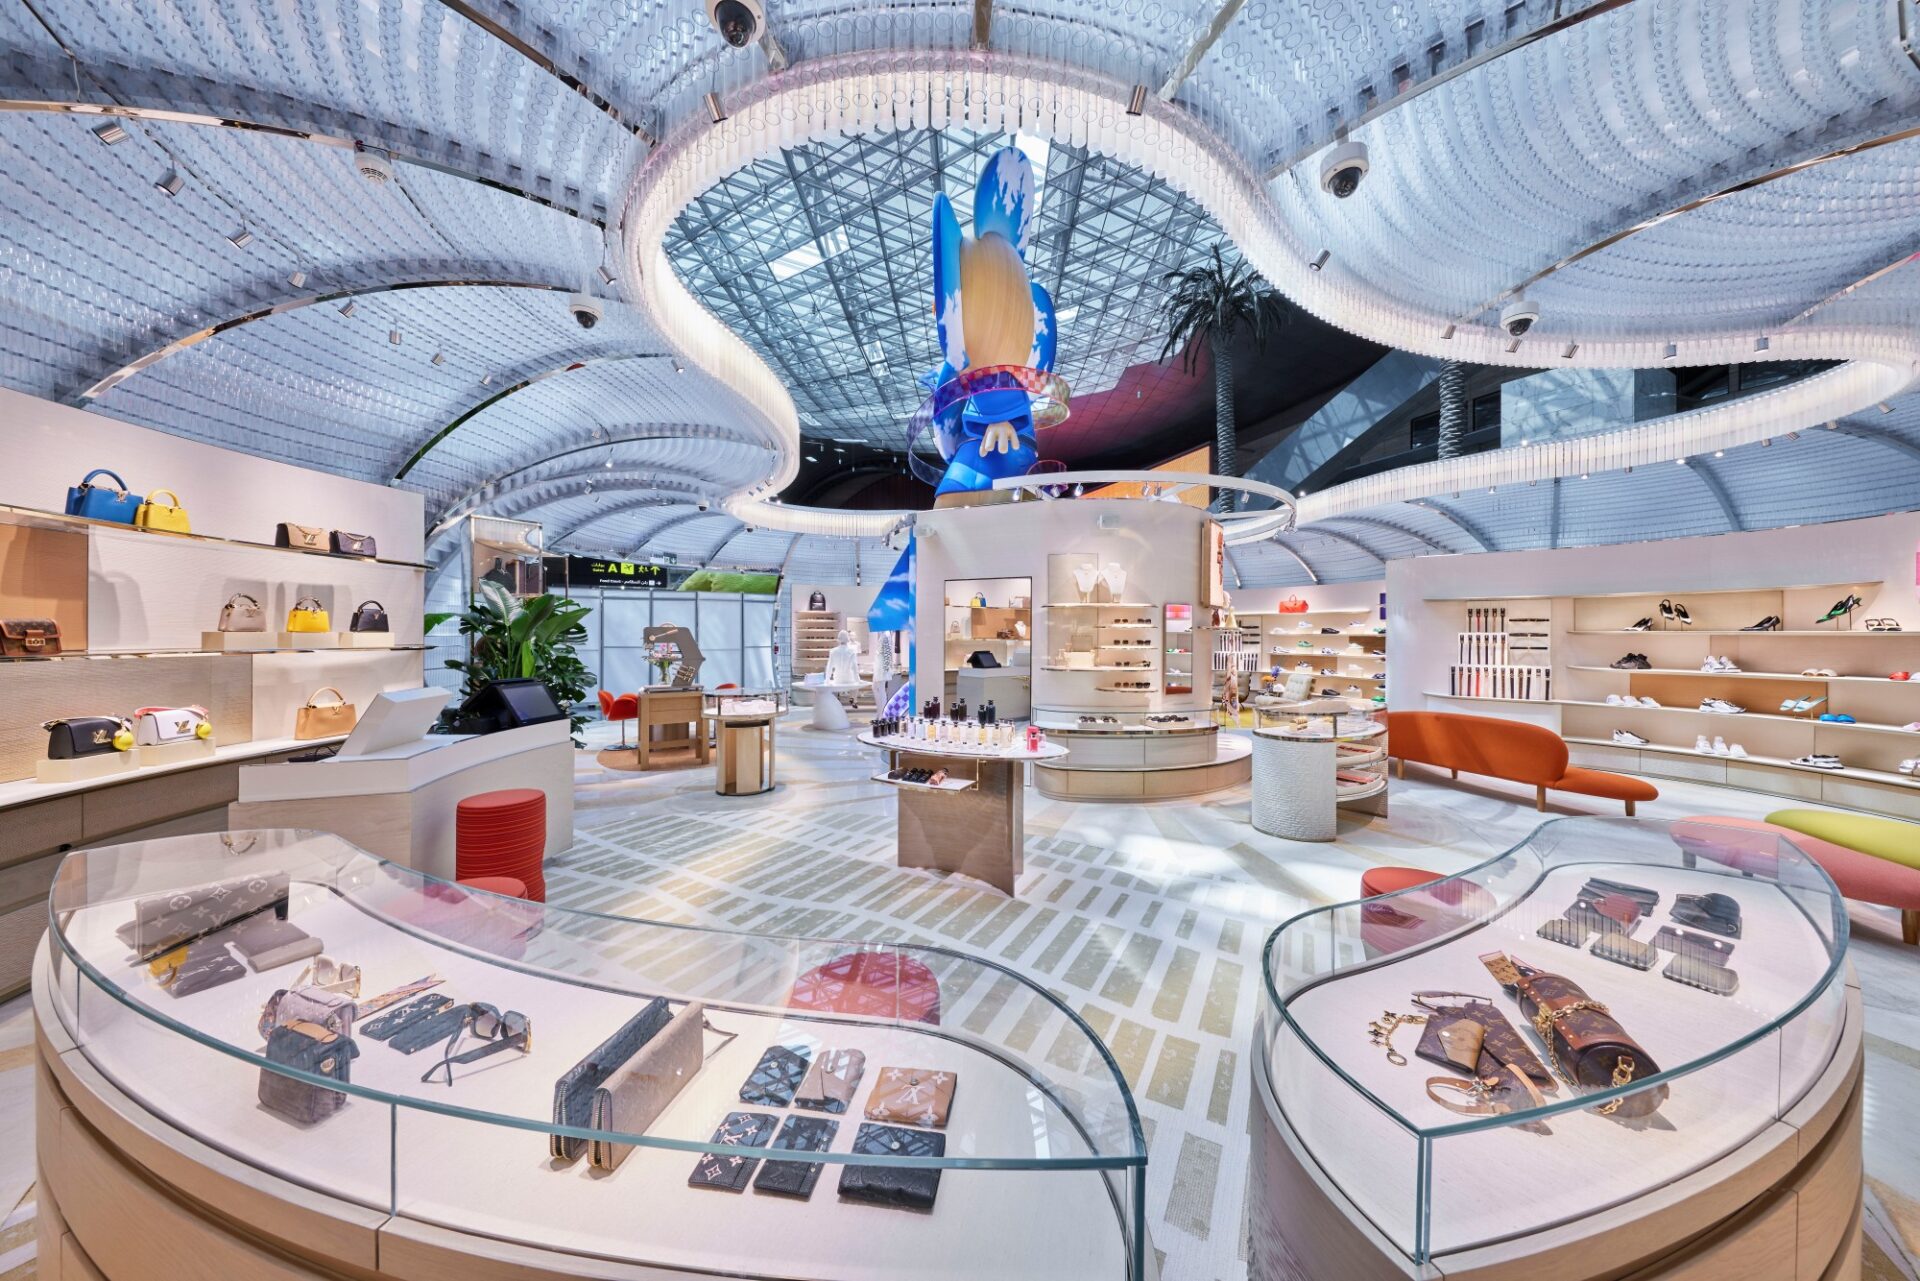 Louis Vuitton Opens First-Ever Airport Lounge In Qatar - A&E Magazine